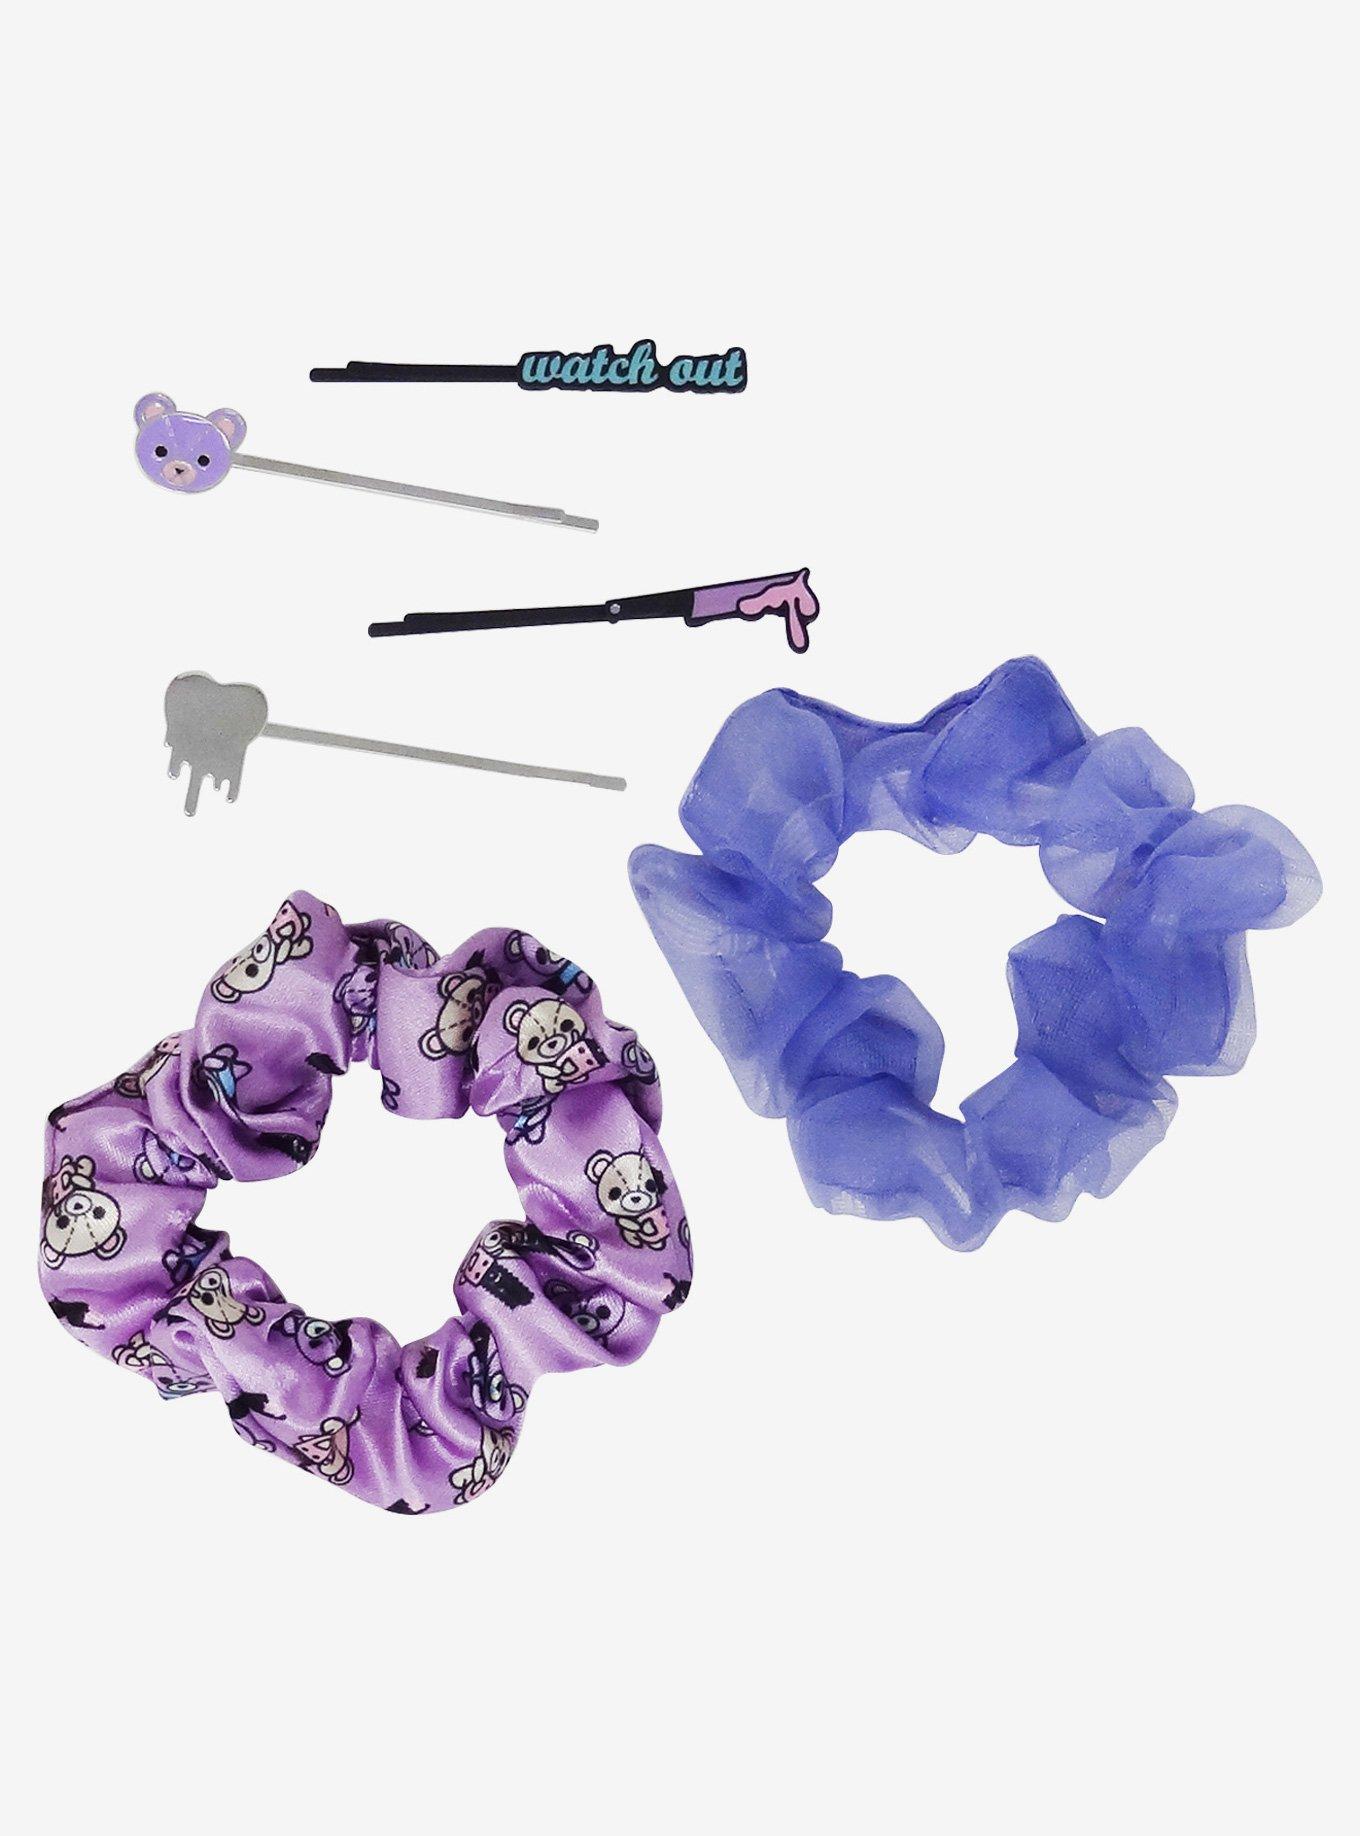 Bears & Weapons Hair Accessory Set, , hi-res